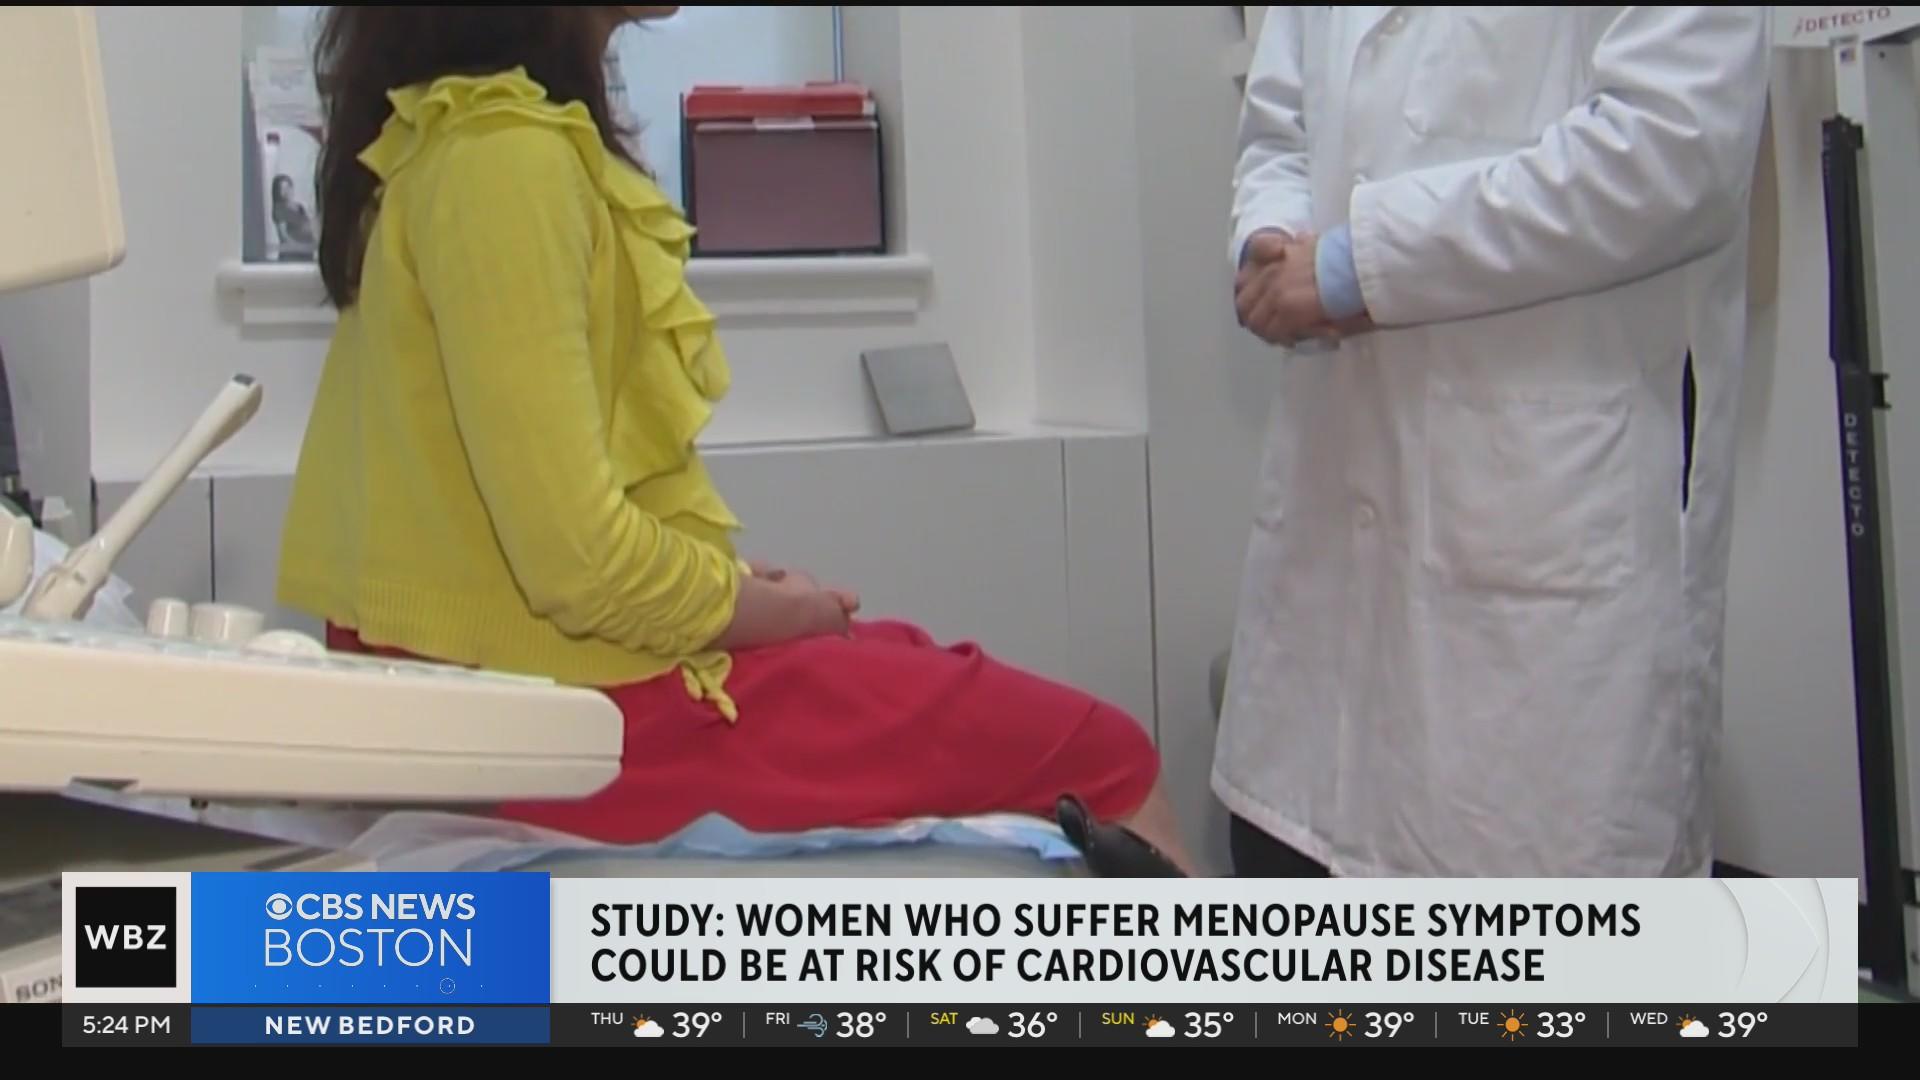 Menopausal women who get migraines could be at higher risk for cardiovascular disease